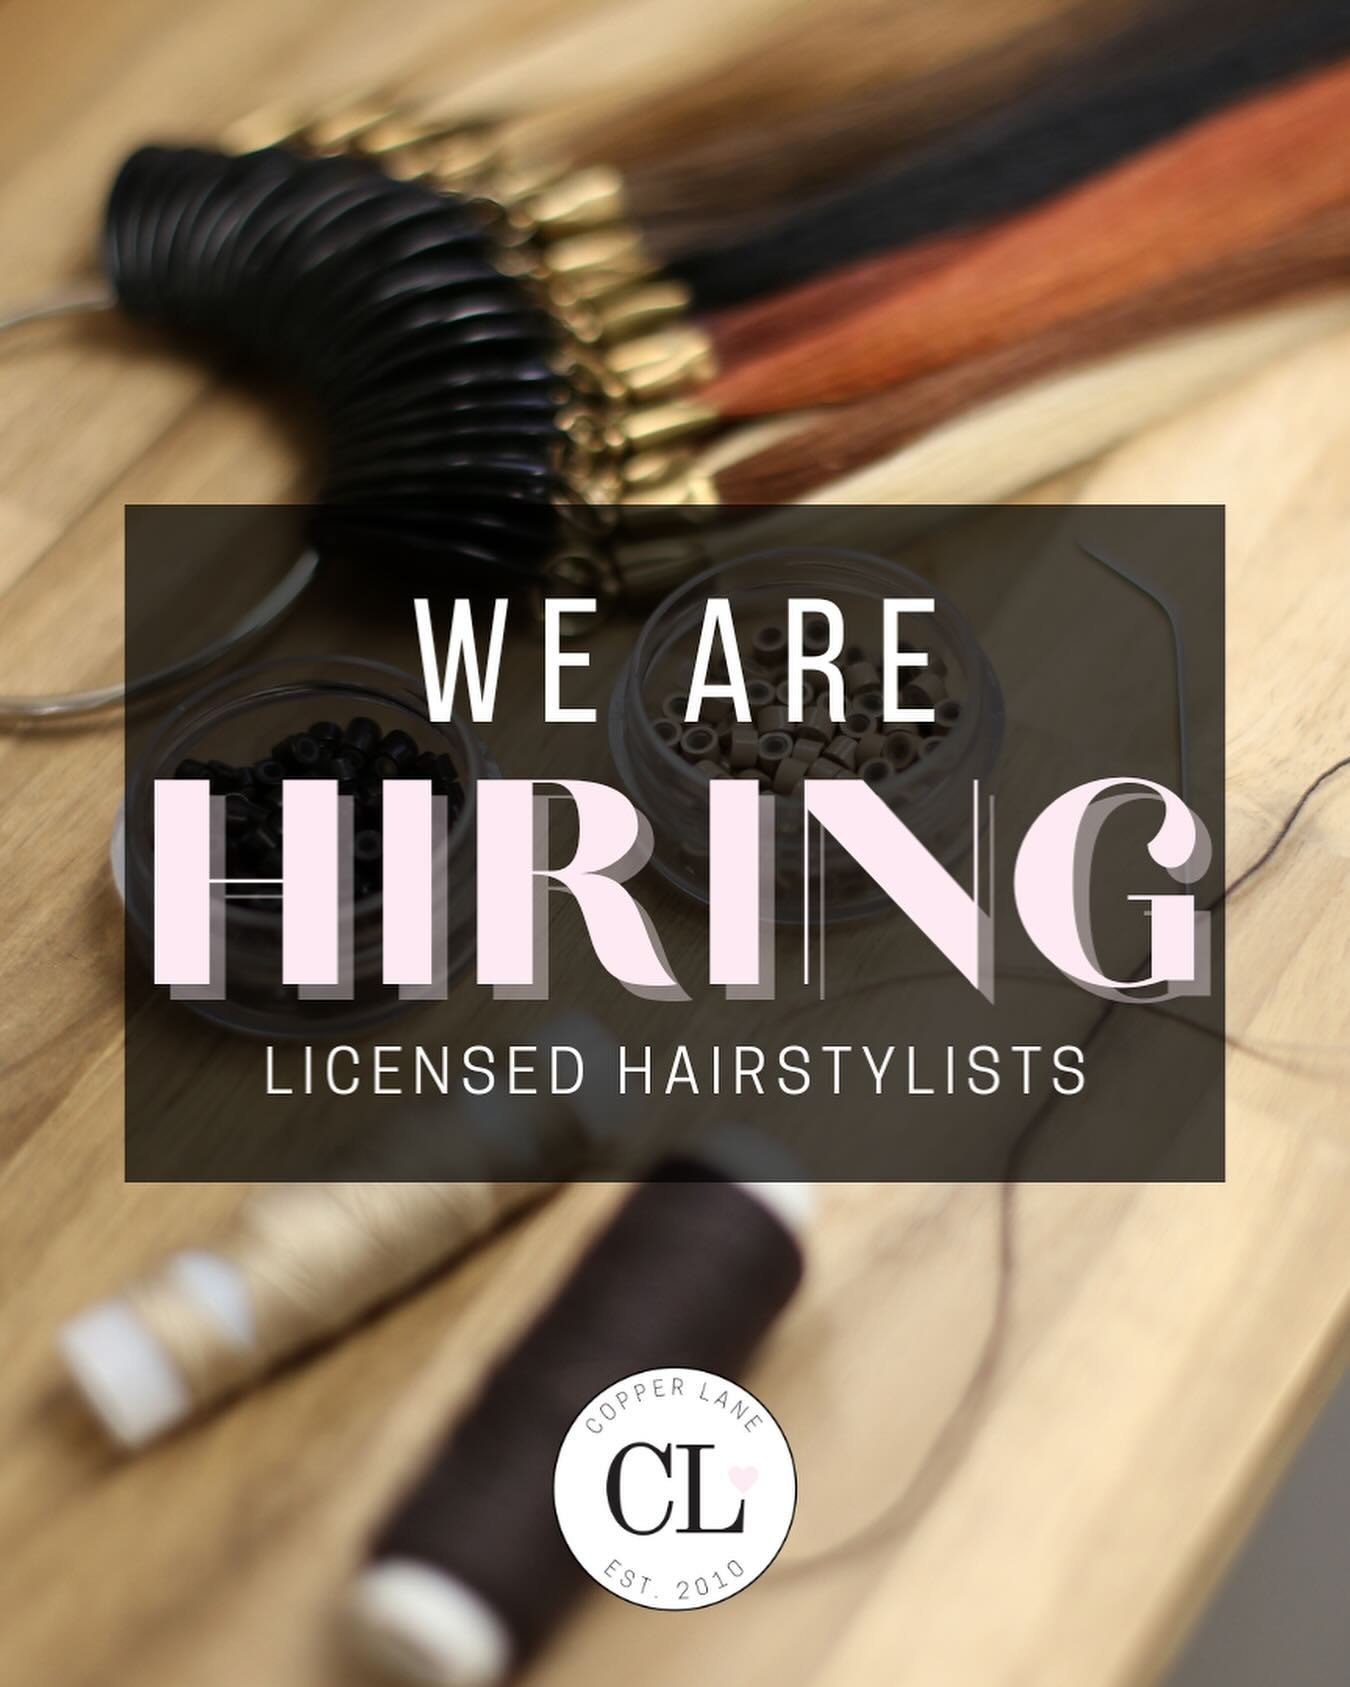 We&rsquo;re looking for YOU! If you&rsquo;re a licensed stylist with 1-2 years experience, we&rsquo;d love to meet. Head to the link in our bio to fill out our contact form.

Not a hairstylist, but know someone who&rsquo;d be great on our team? Share